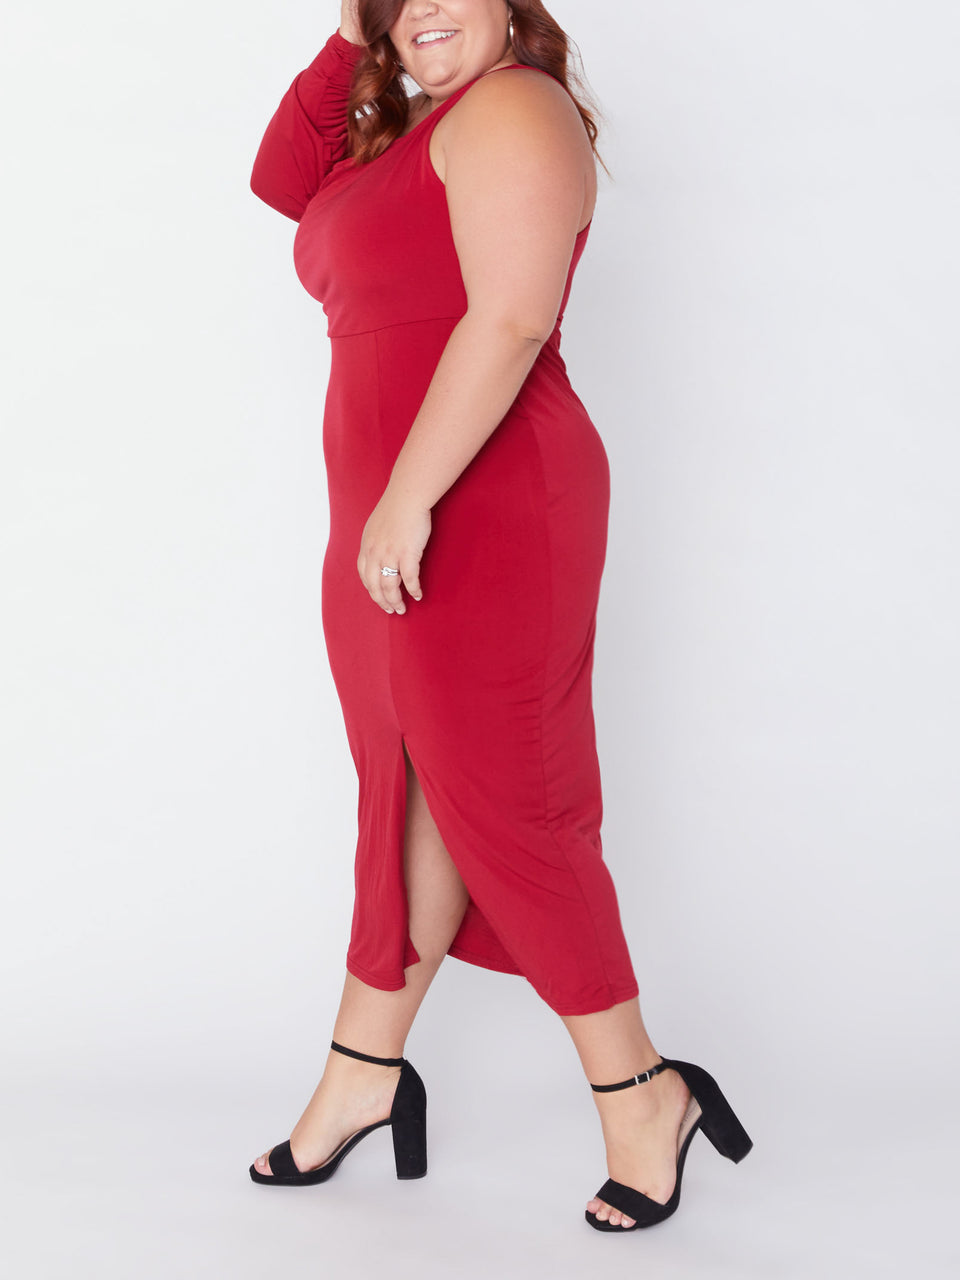 Soncy_Paint the Town Red Midi Dress_Red